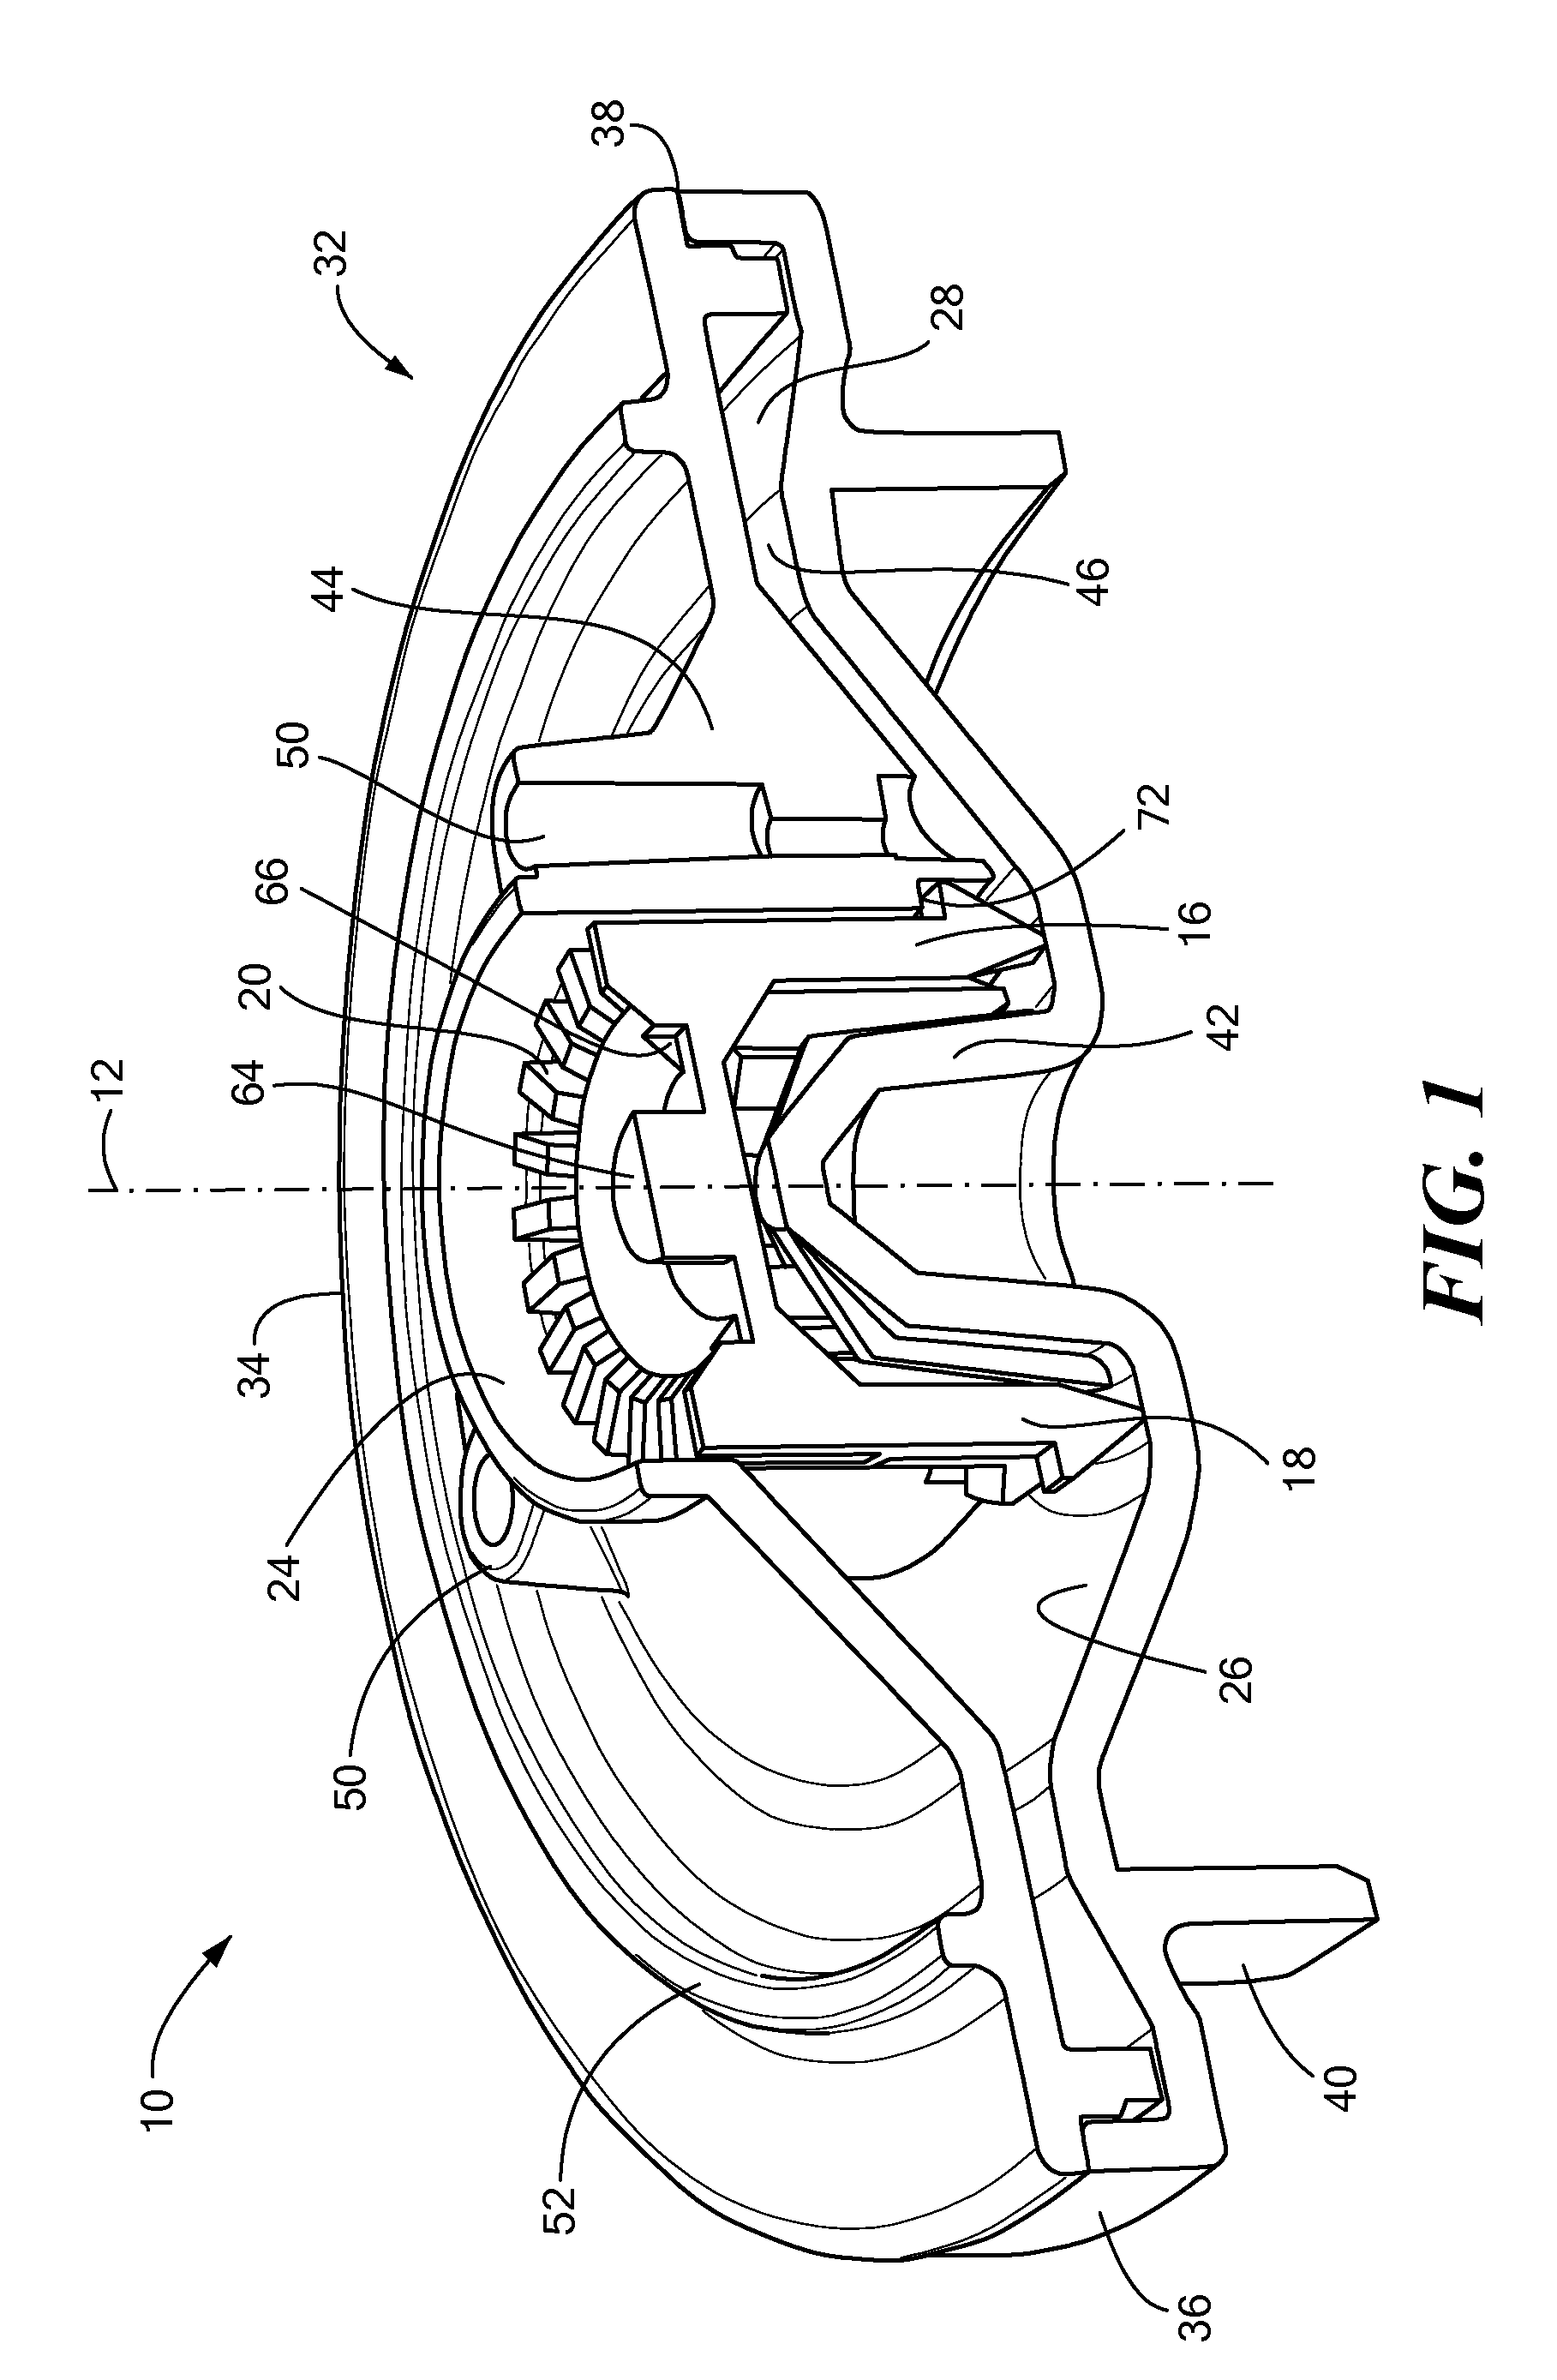 Centrifugal device and method for ova detection